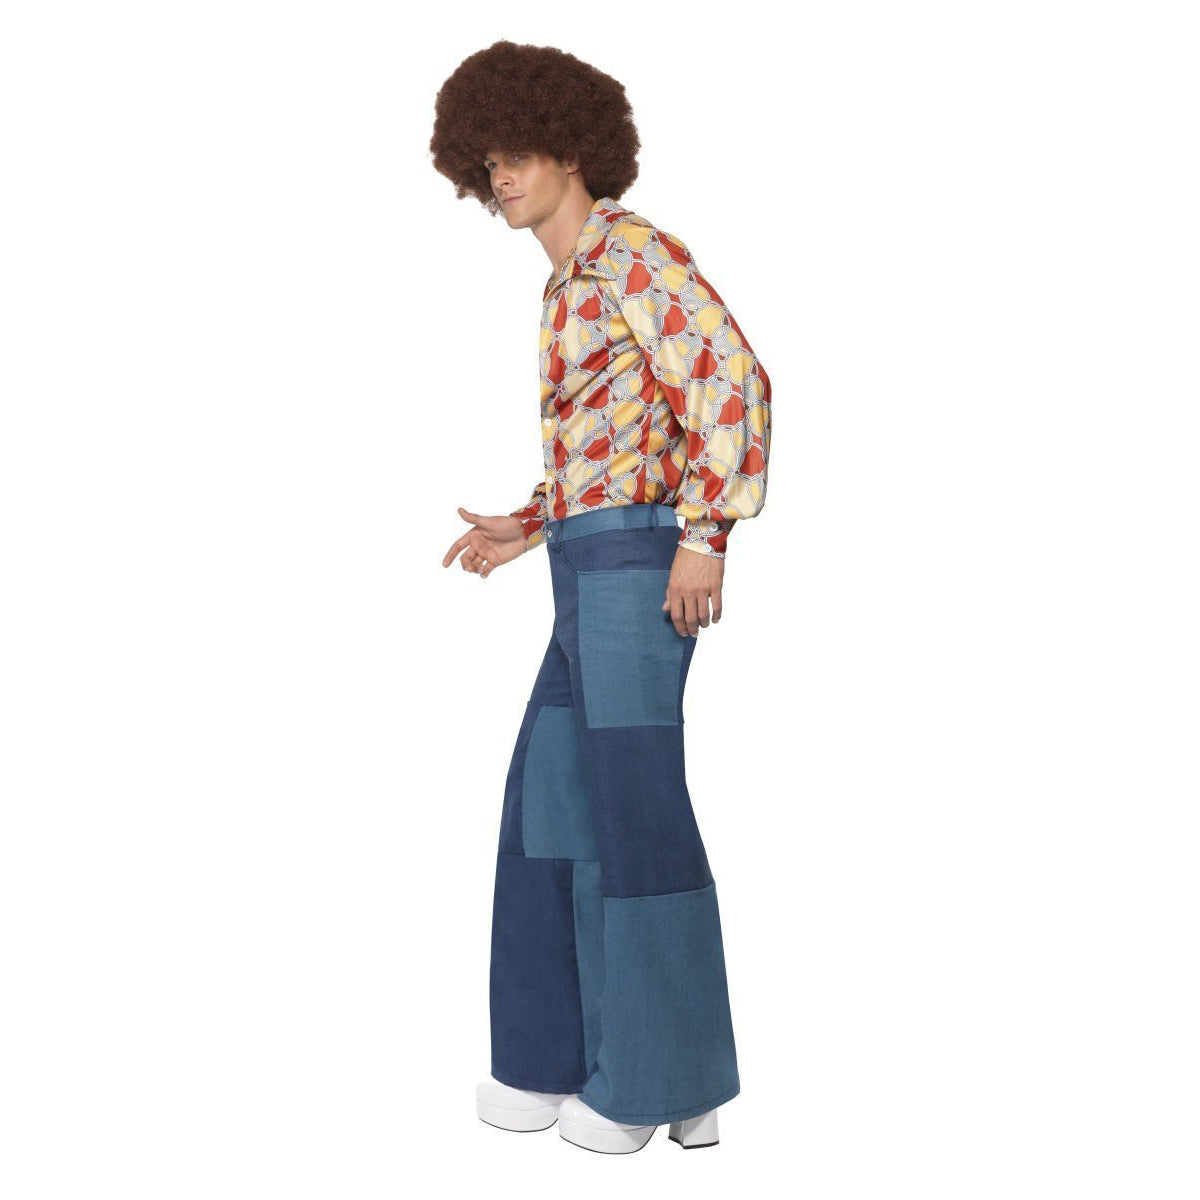 Retro Clothing | Mens Flares | Bell Bottoms | Vintage | Mens indie